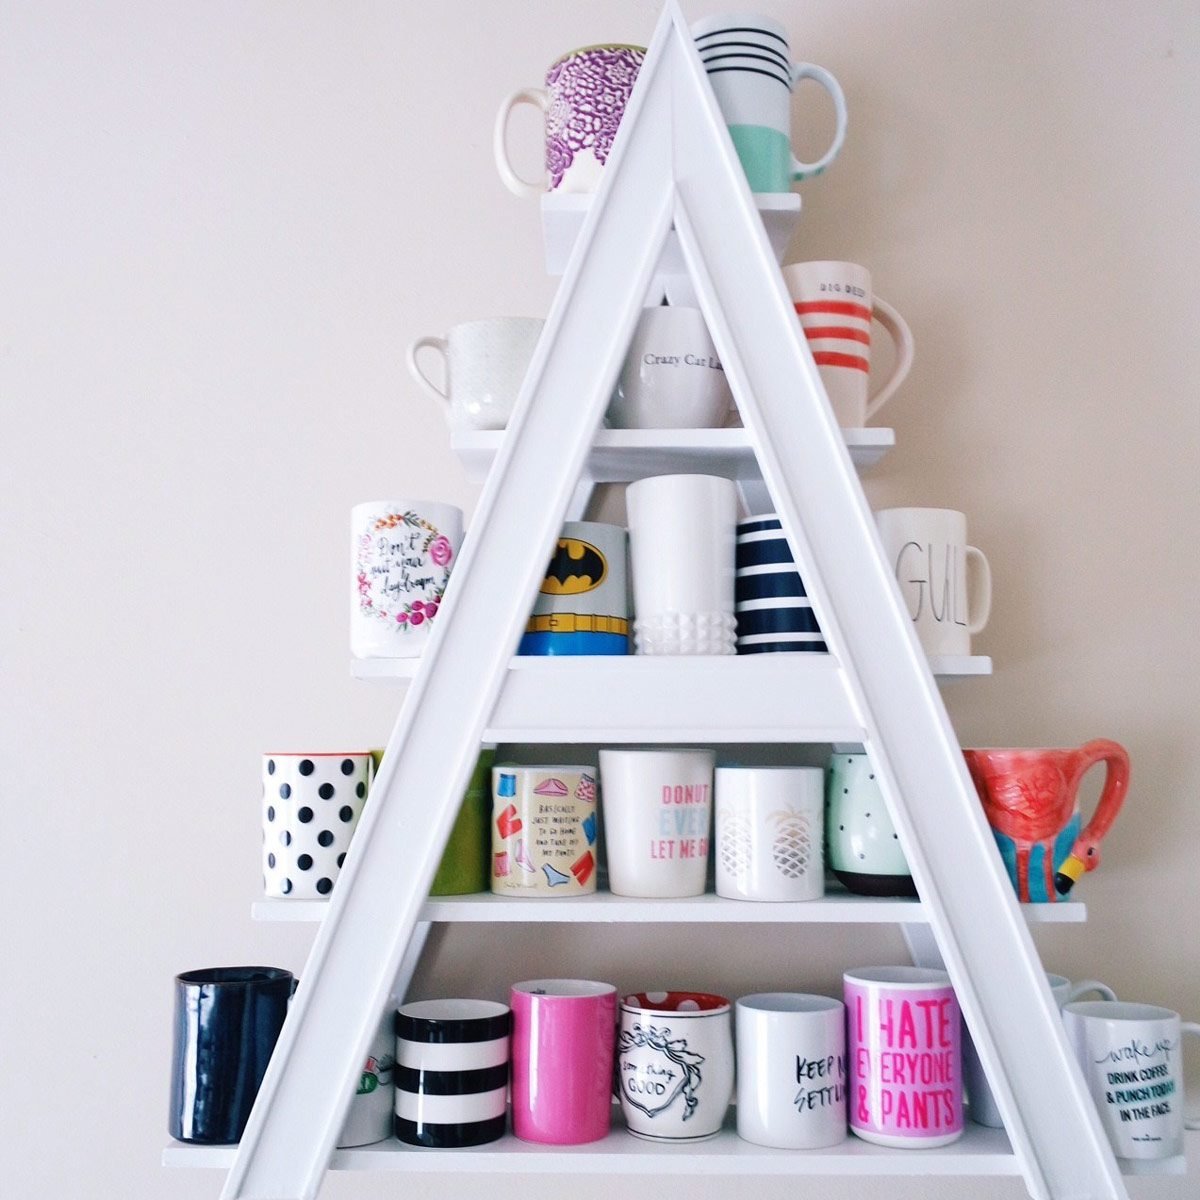 Top 5 DIY Coffee Cup Display! The best maker build videos for your